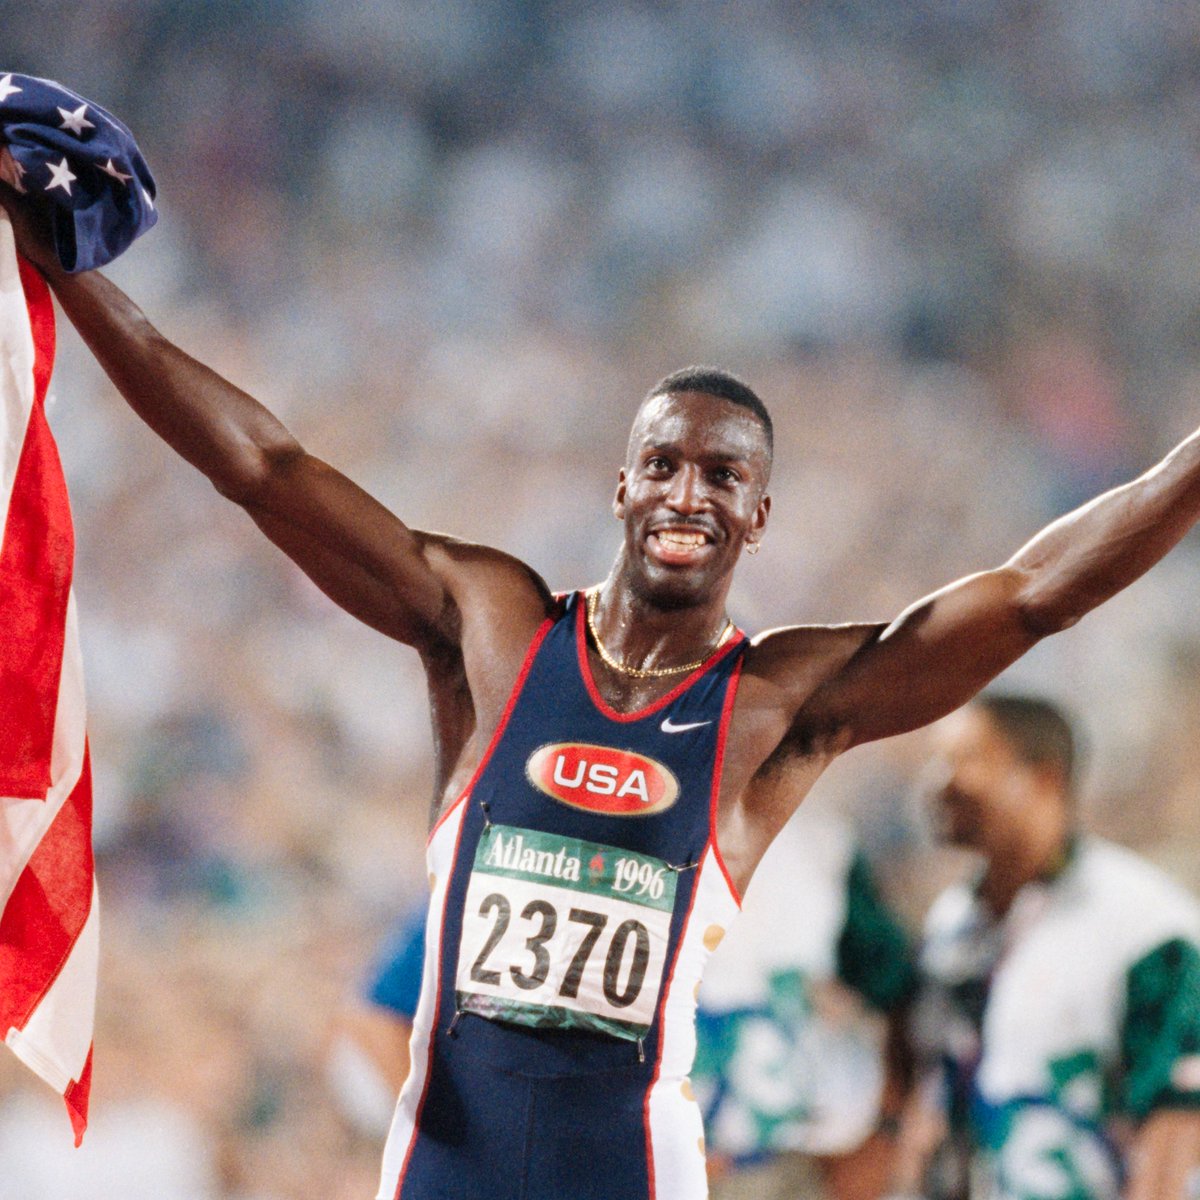 .@MJGold, one of the greatest sprinters of all time, is partnering with @WinnersAlliance to develop a new track league that aims to better engage existing fans by providing a TV-friendly product to promote the sport’s biggest stars and draw new audiences Read ➡️…